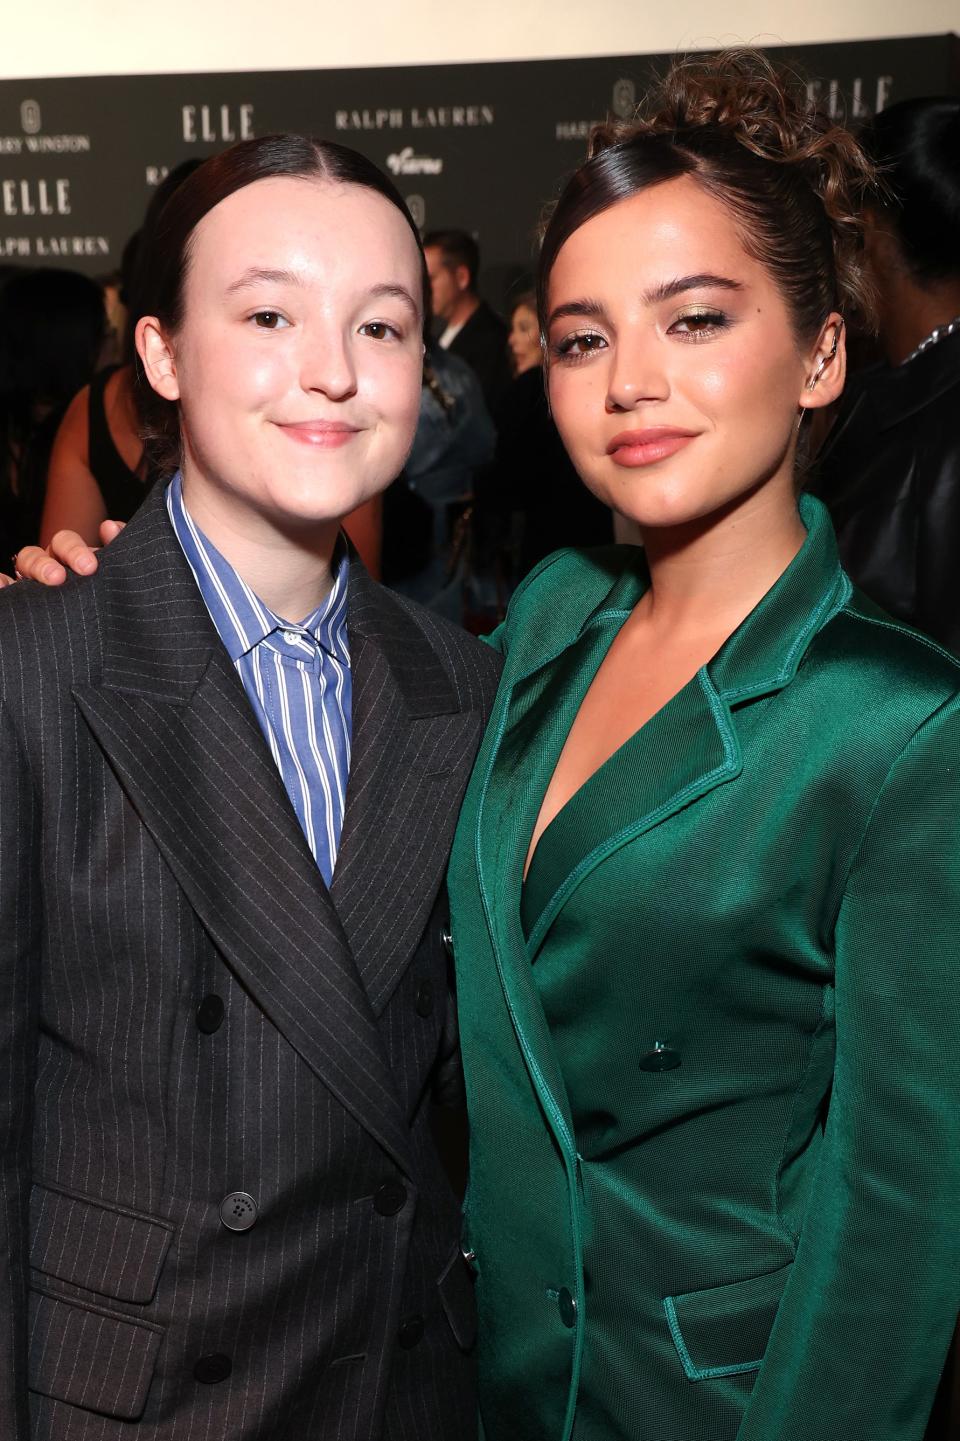 Bella Ramsey and Isabela Merced posing, one in a pinstripe suit, the other in a green suit, at a formal event